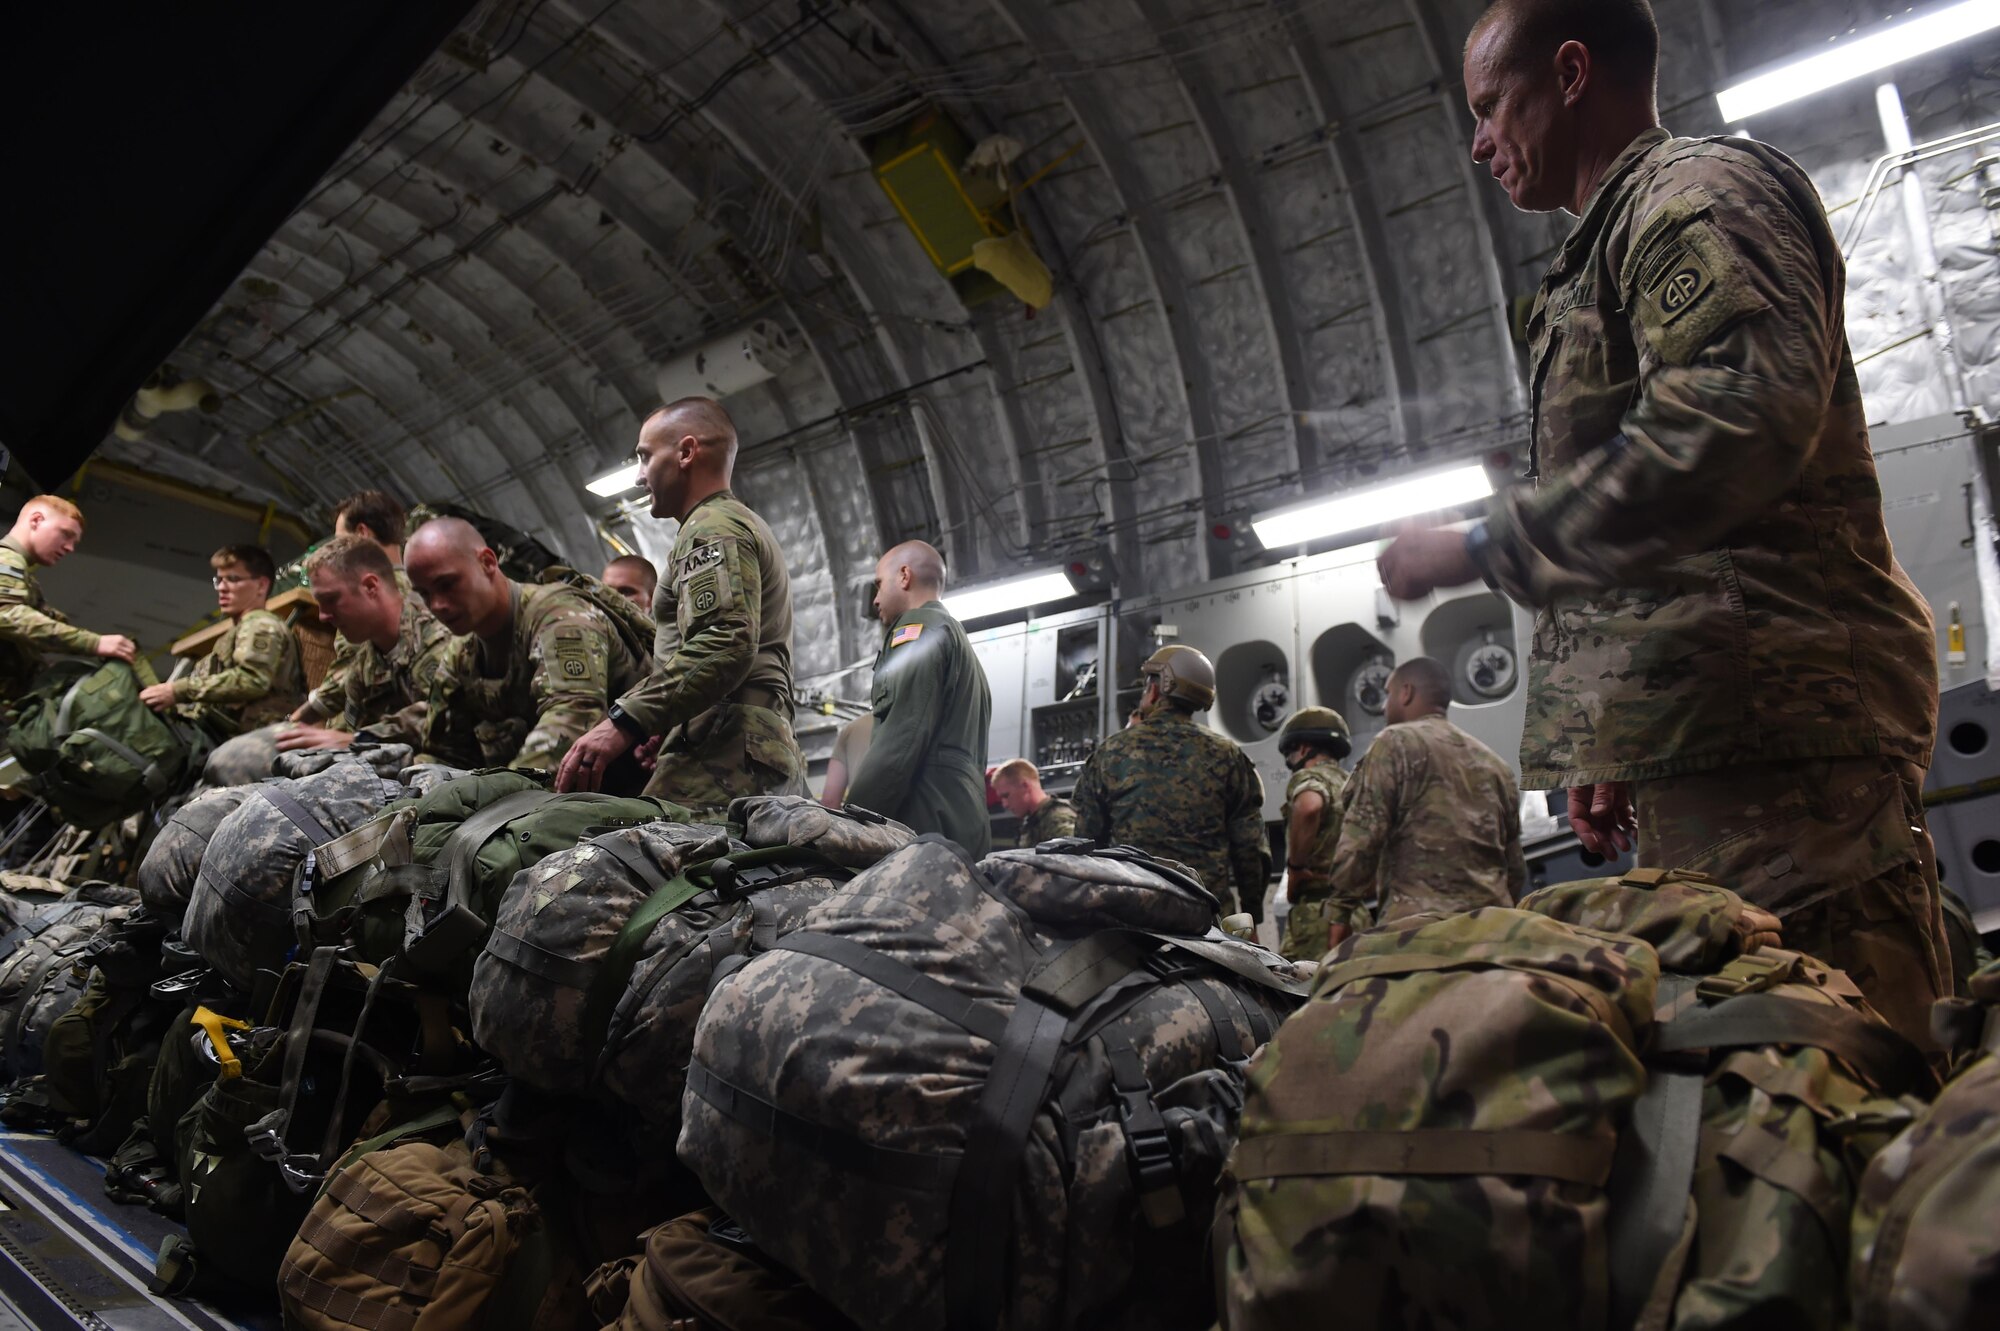 Paratroopers with the 82nd Airborne Division load their equipment into a 62nd Airlift Wing C-17 Globemaster III on Pope Army Air Field, N.C. on June 6, 2016. More than 80 paratroopers from U.S., British and Polish Forces jumped from the C-17 into Poland as part of Exercise Swift Response 2016. (Air Force photo/Staff Sgt. Naomi Shipley)